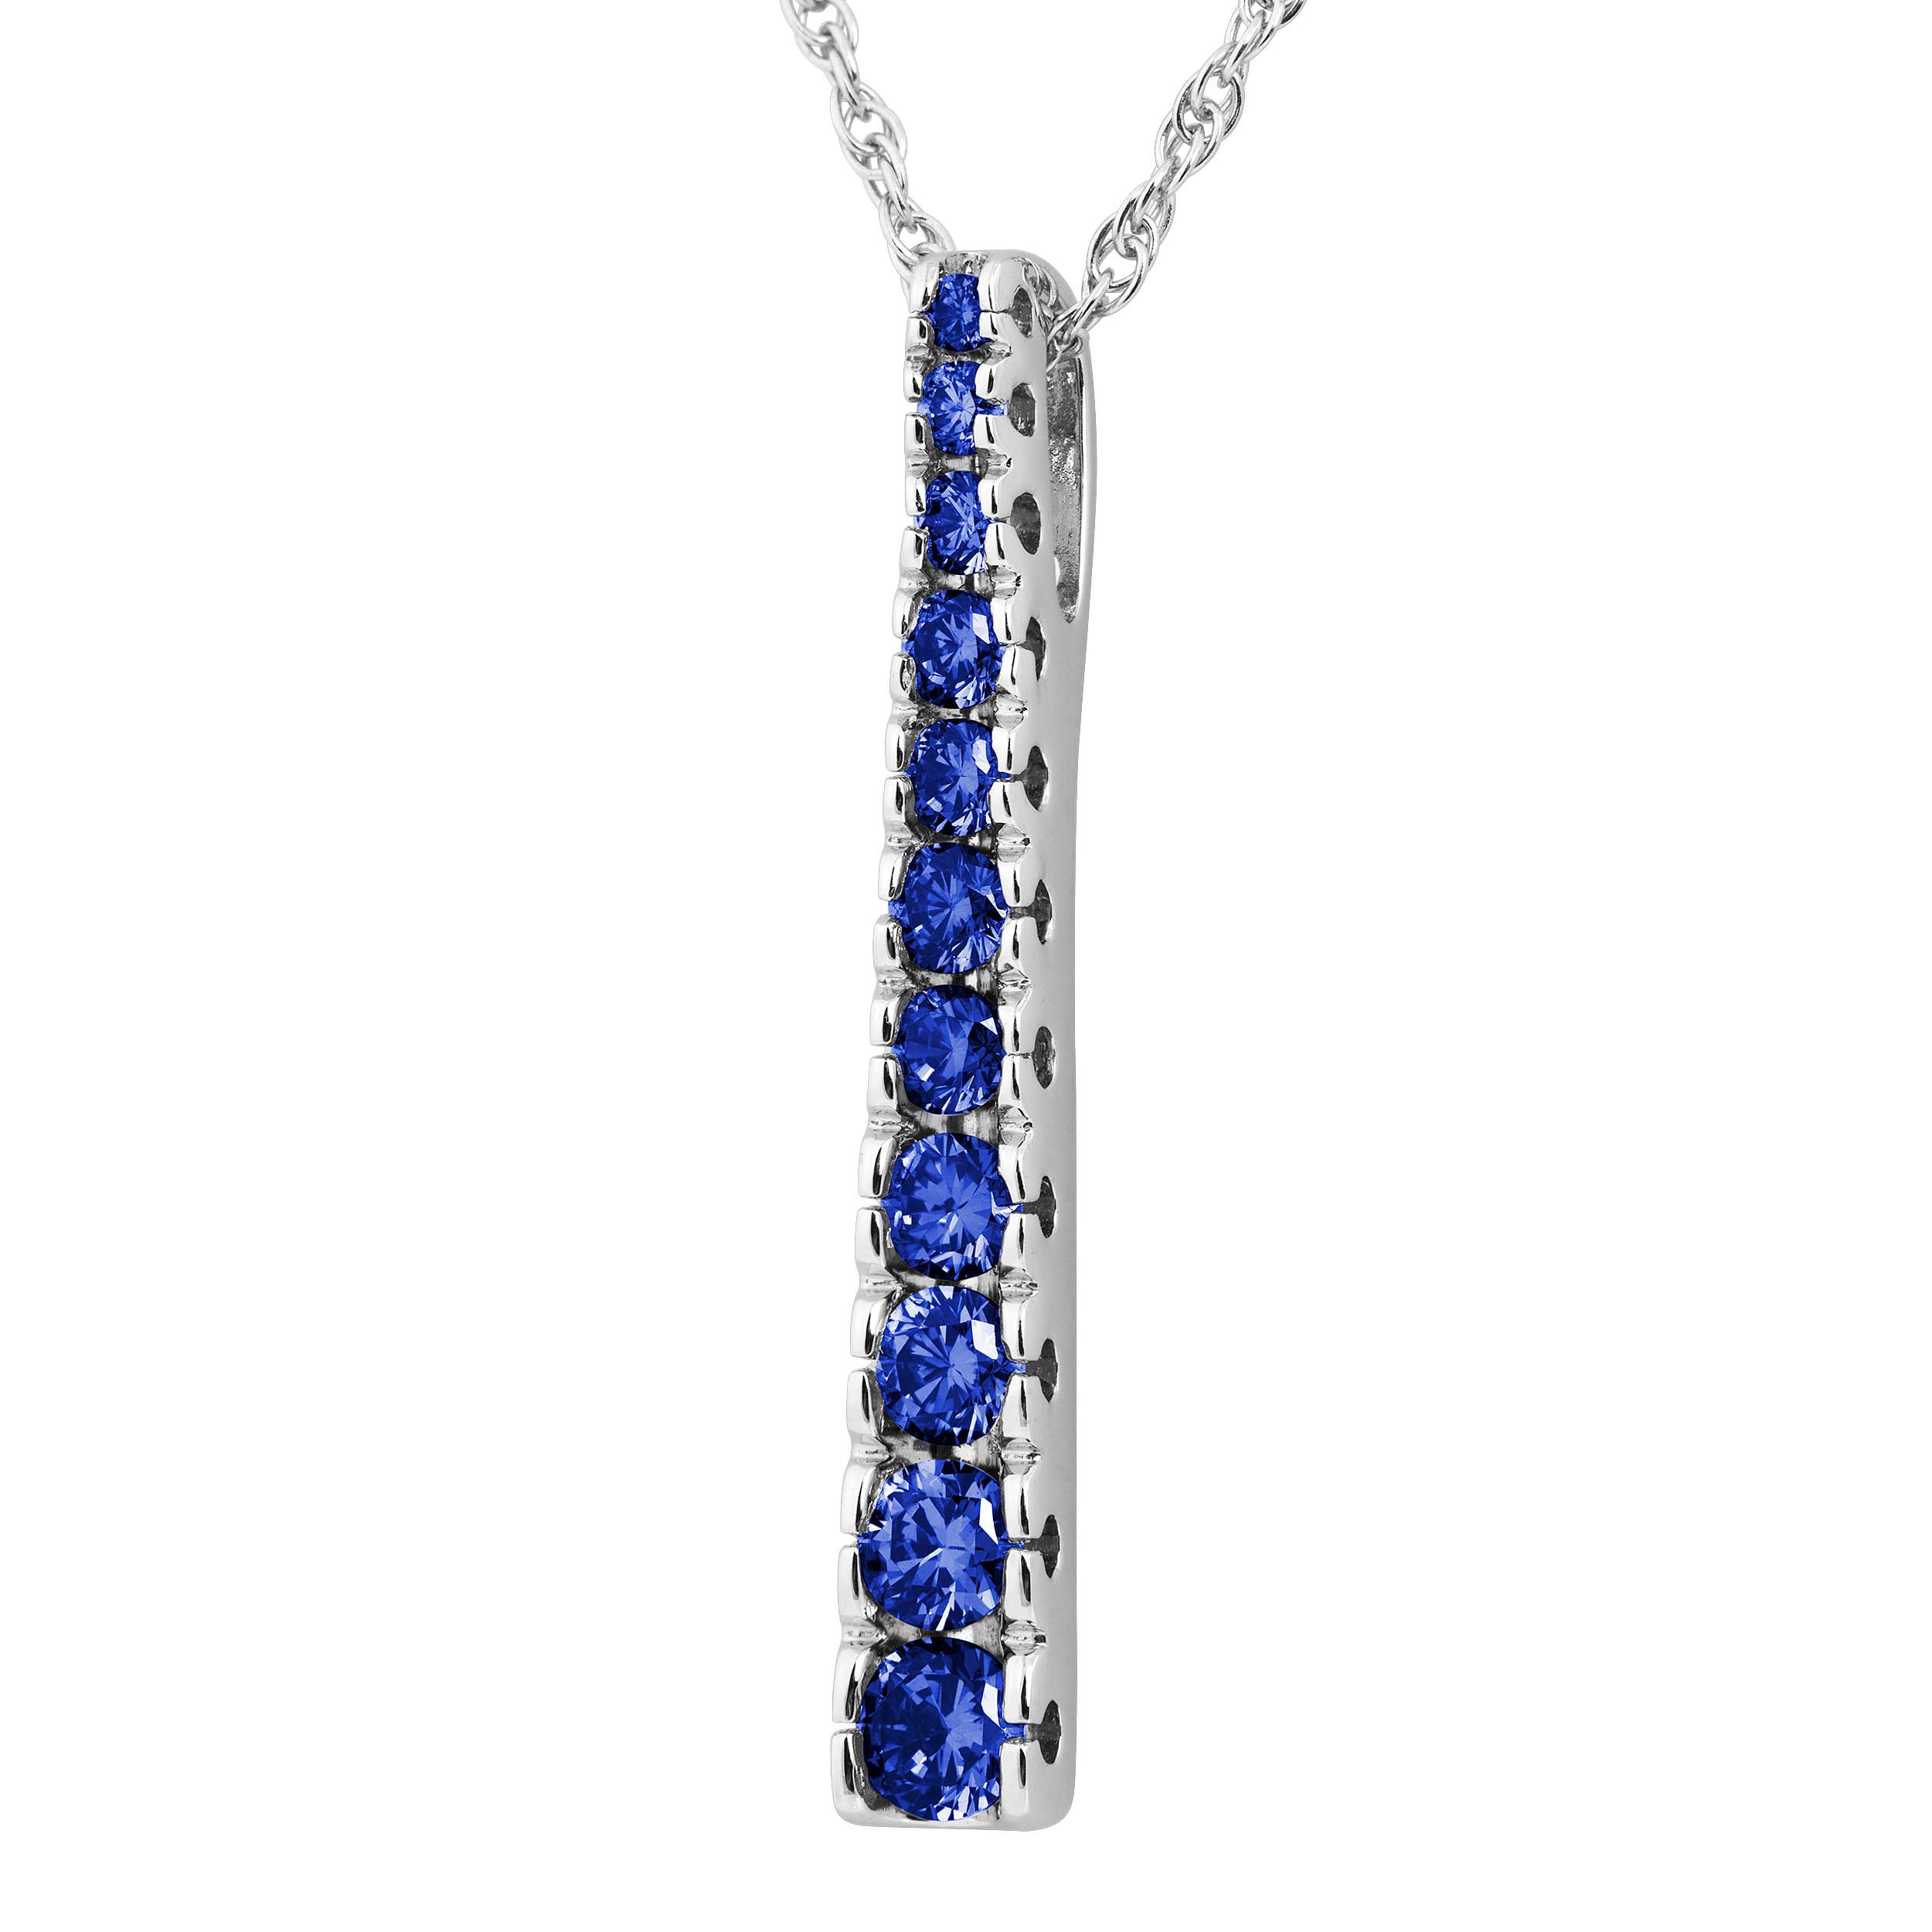  Created Blue Sapphire Pendant Necklace, Rhodium Plated Sterling Silver